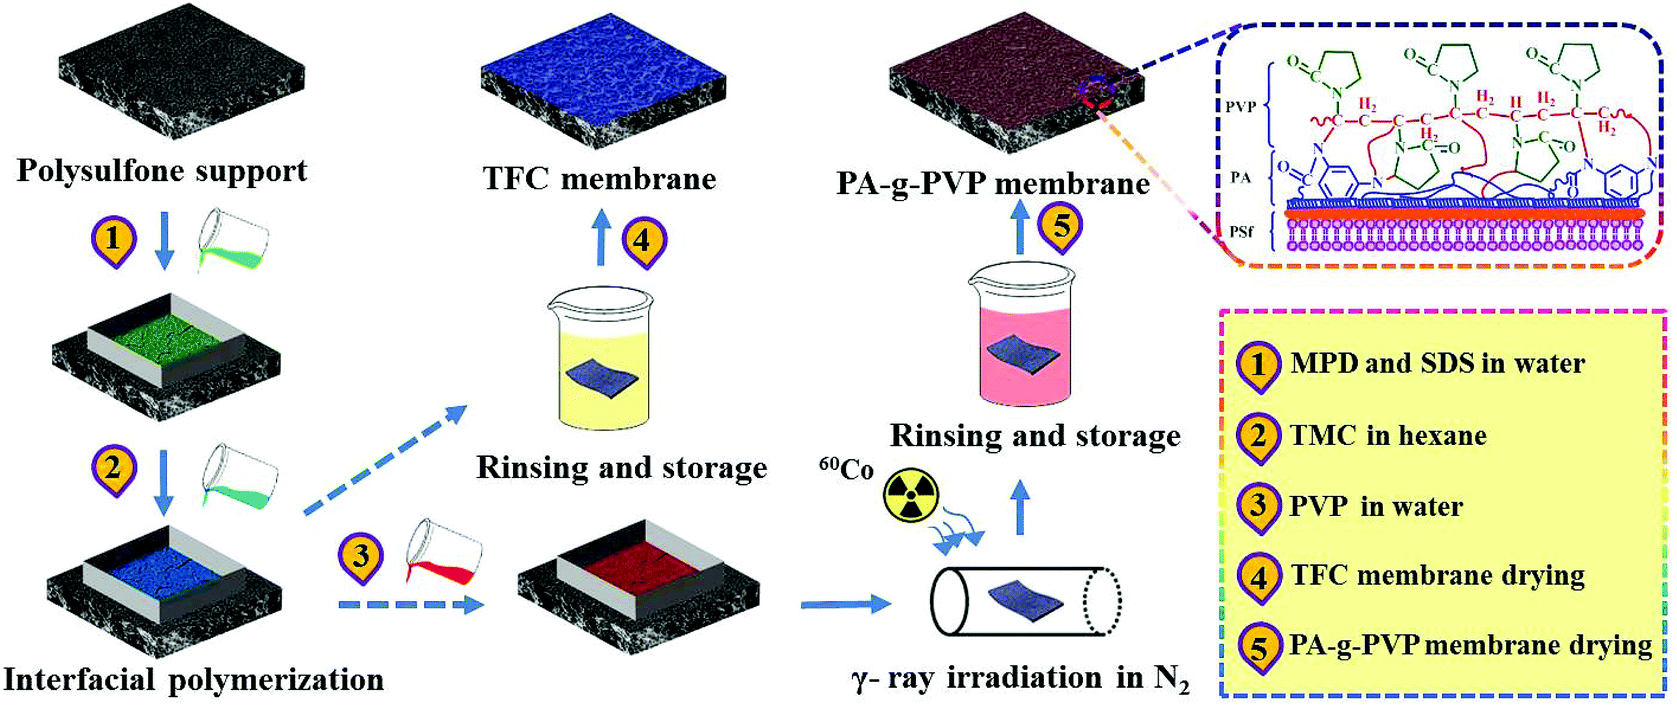 Tailor Made High Performance Reverse Osmosis Membranes By Surface Fixation Of Hydrophilic Macromolecules For Wastewater Treatment Rsc Advances Rsc Publishing Doi 10 1039 C9raf